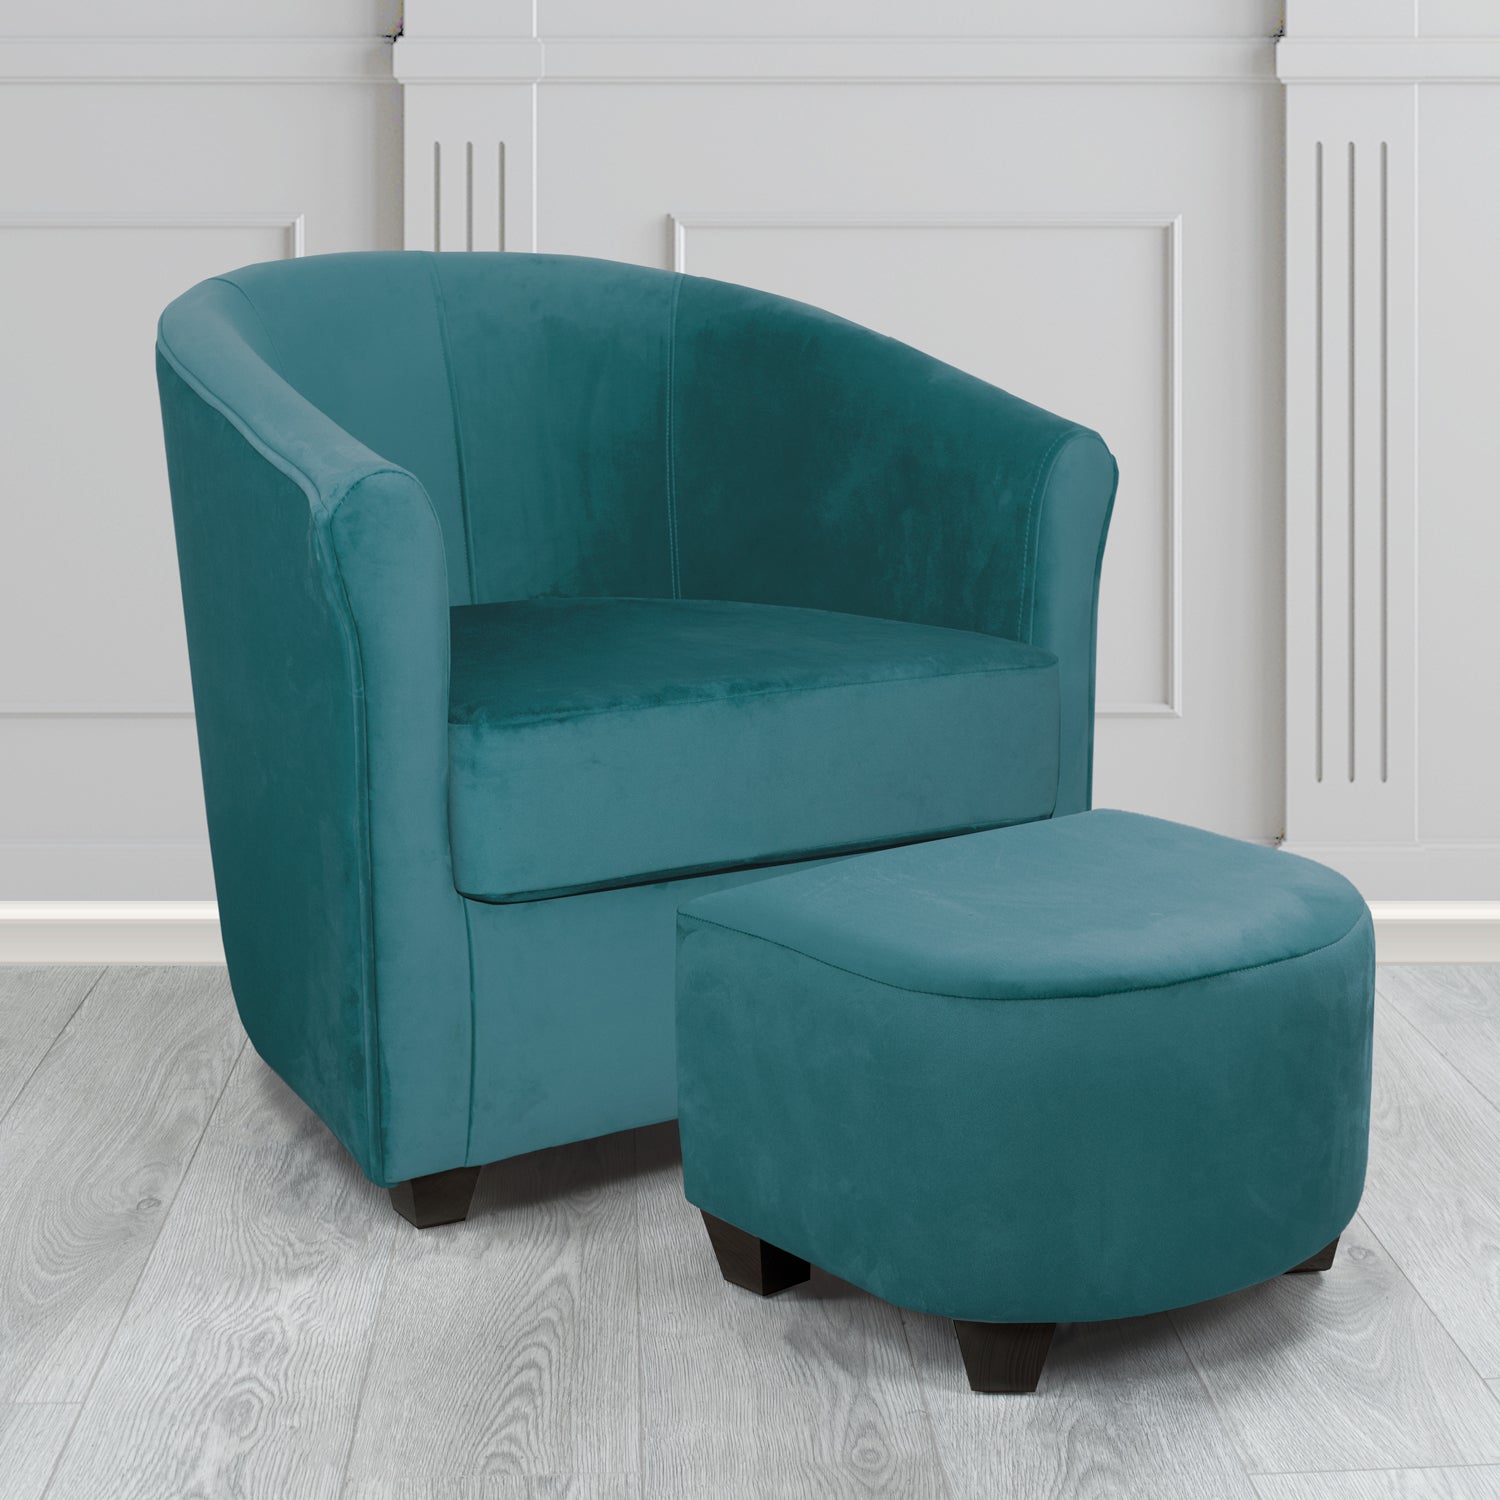 Teal Tub Chair with Footstool Sets | Blue/Green Tones